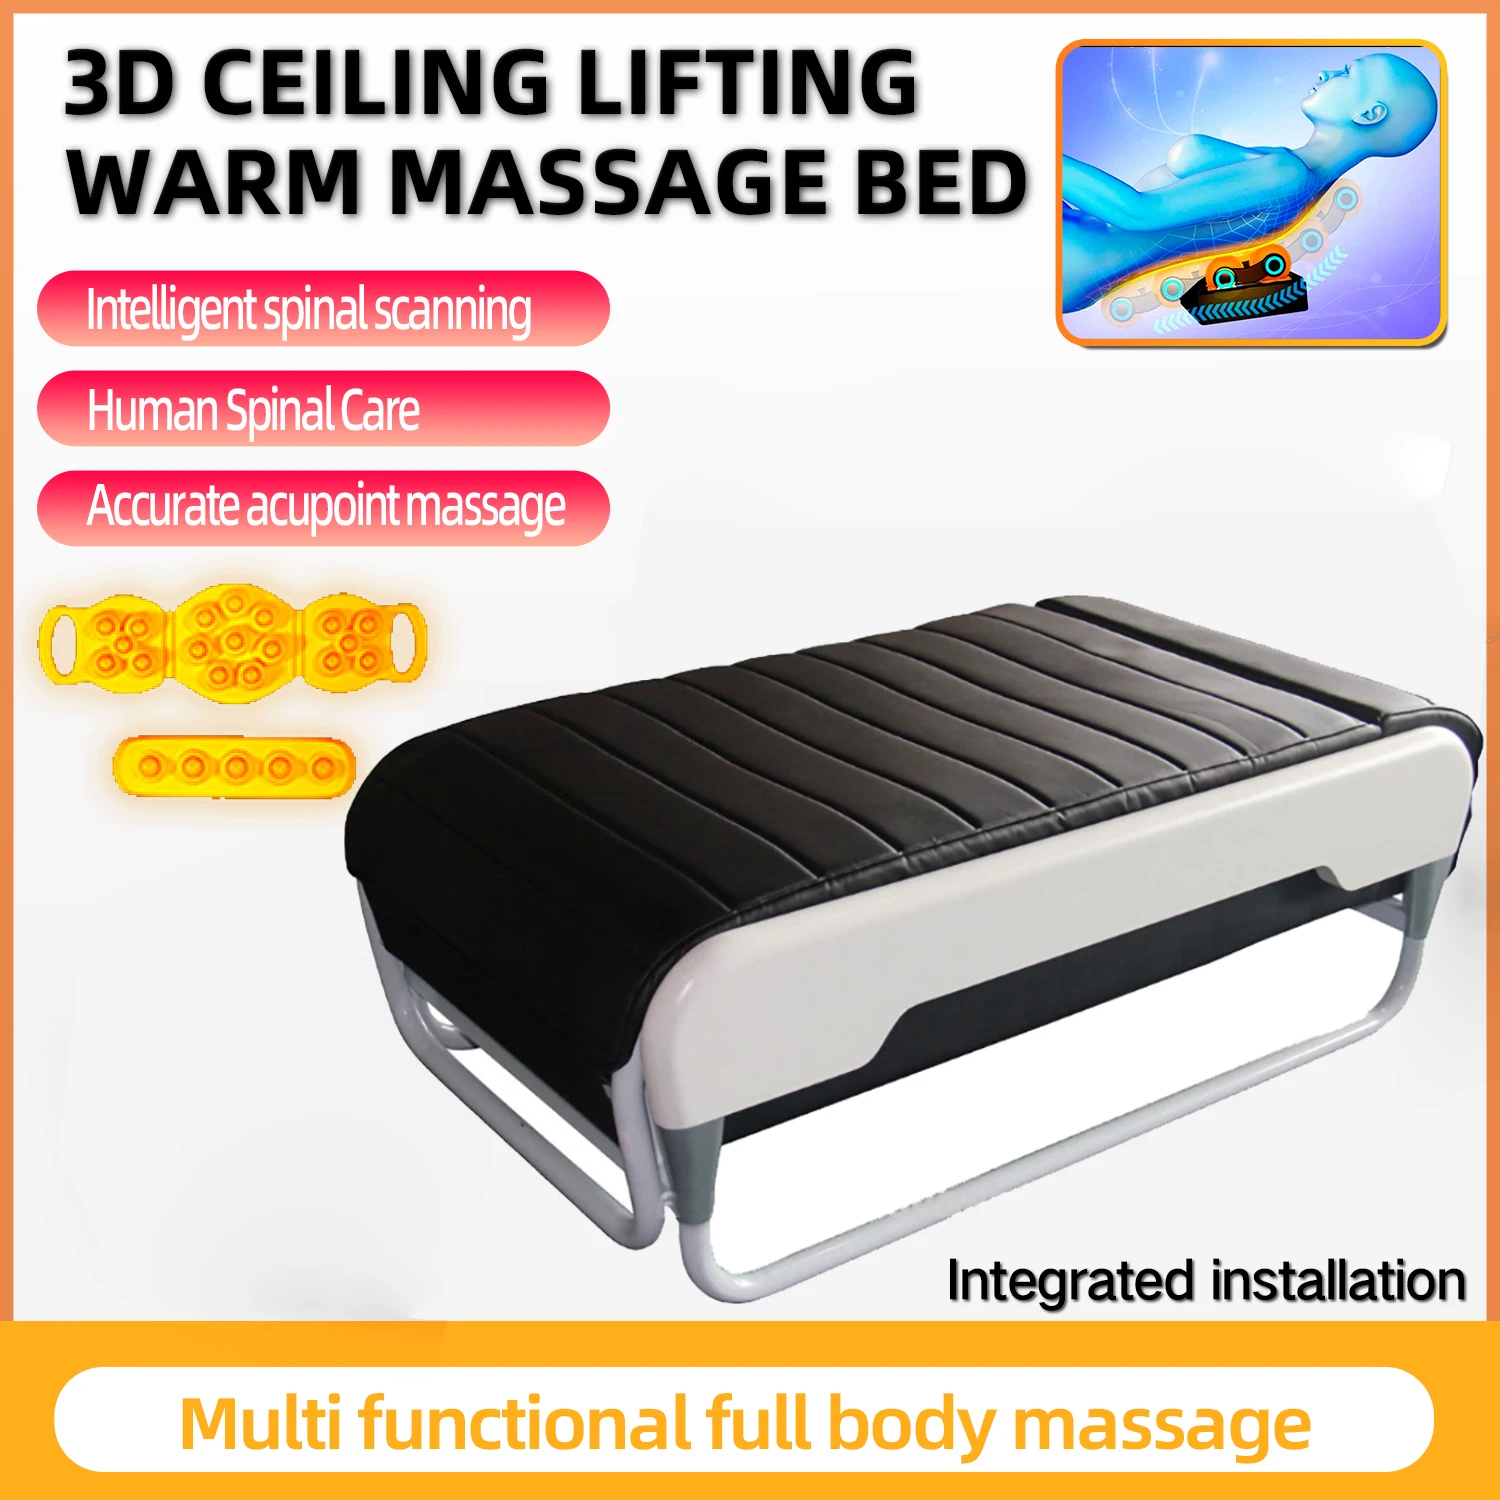 Jade Stone Massage Bed Electric Massage  Full Body 3D Master Massage Chair Bed With Air Pressur Heat Christmas New Year Gifte tumbeelluwa natural agate slices geode stone beverage coaster cup mat engraved merry christmas and happy new year